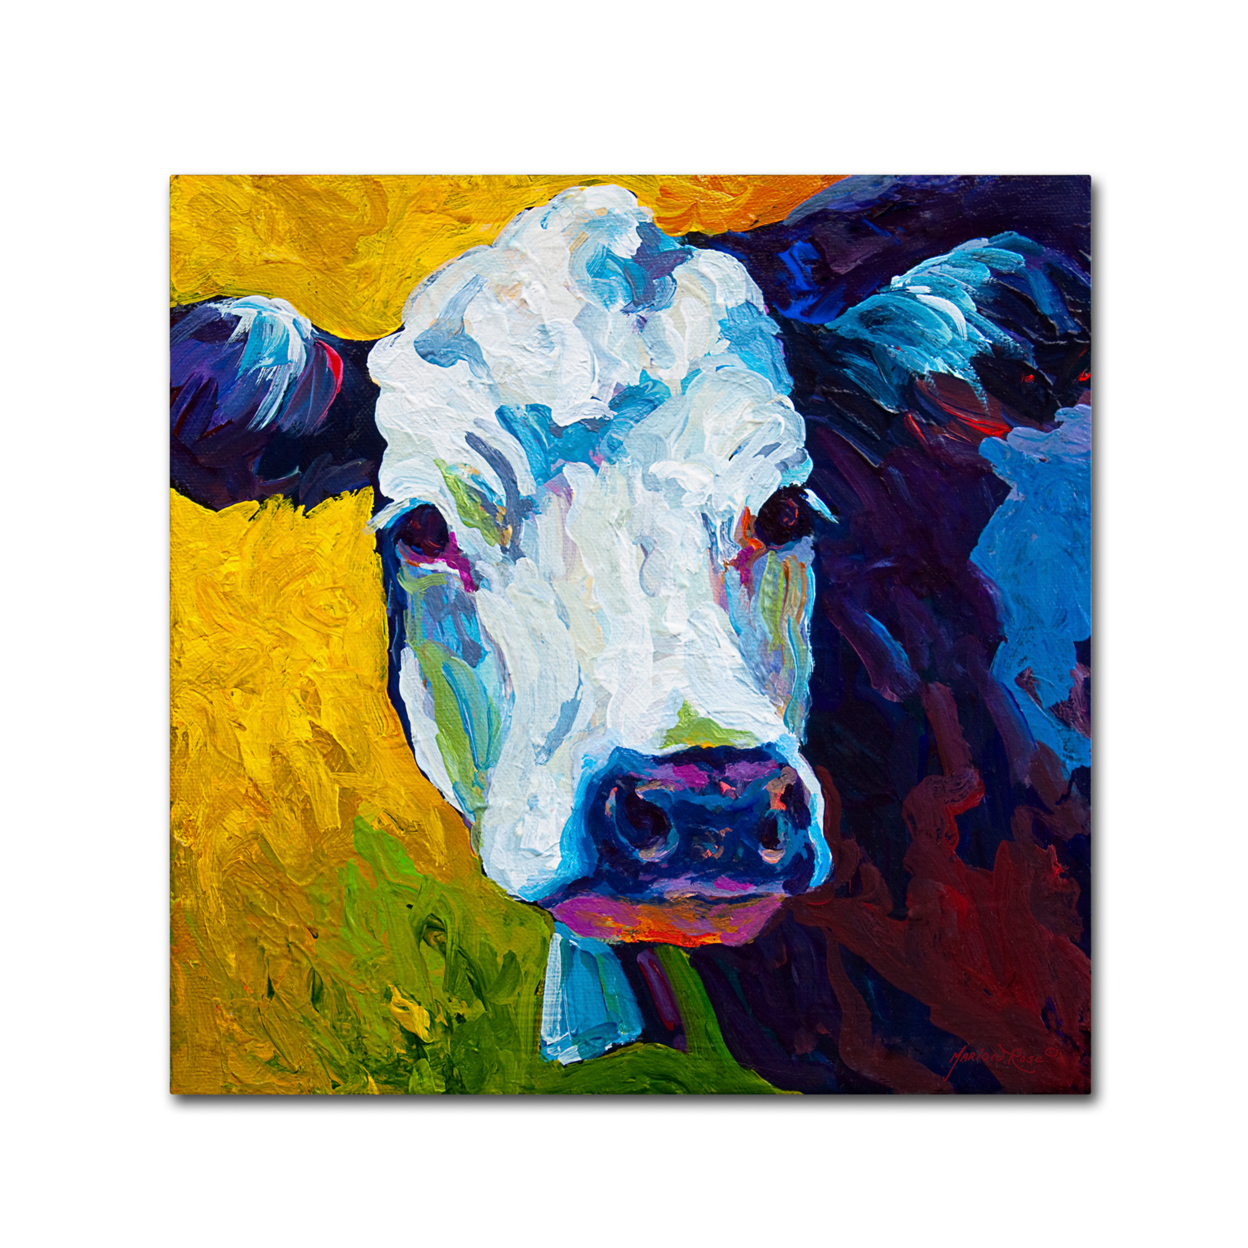 Marion Rose 'Belle' Ready To Hang Canvas Art 35 X 35 Inches Made In USA